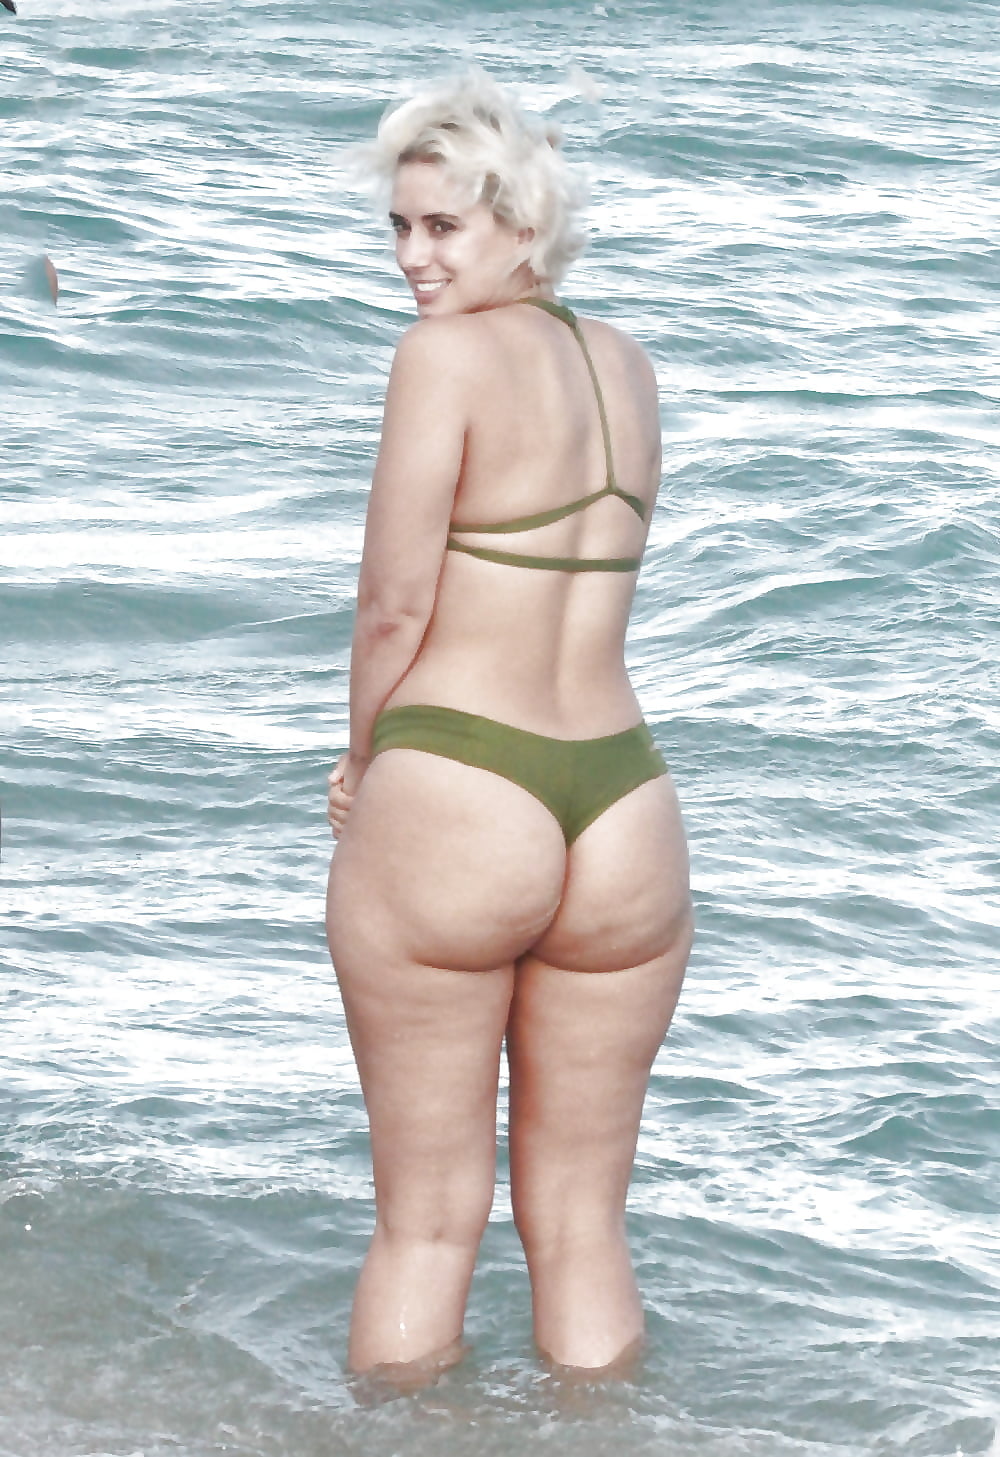 asses of all shapes and sizes - Photo #168 